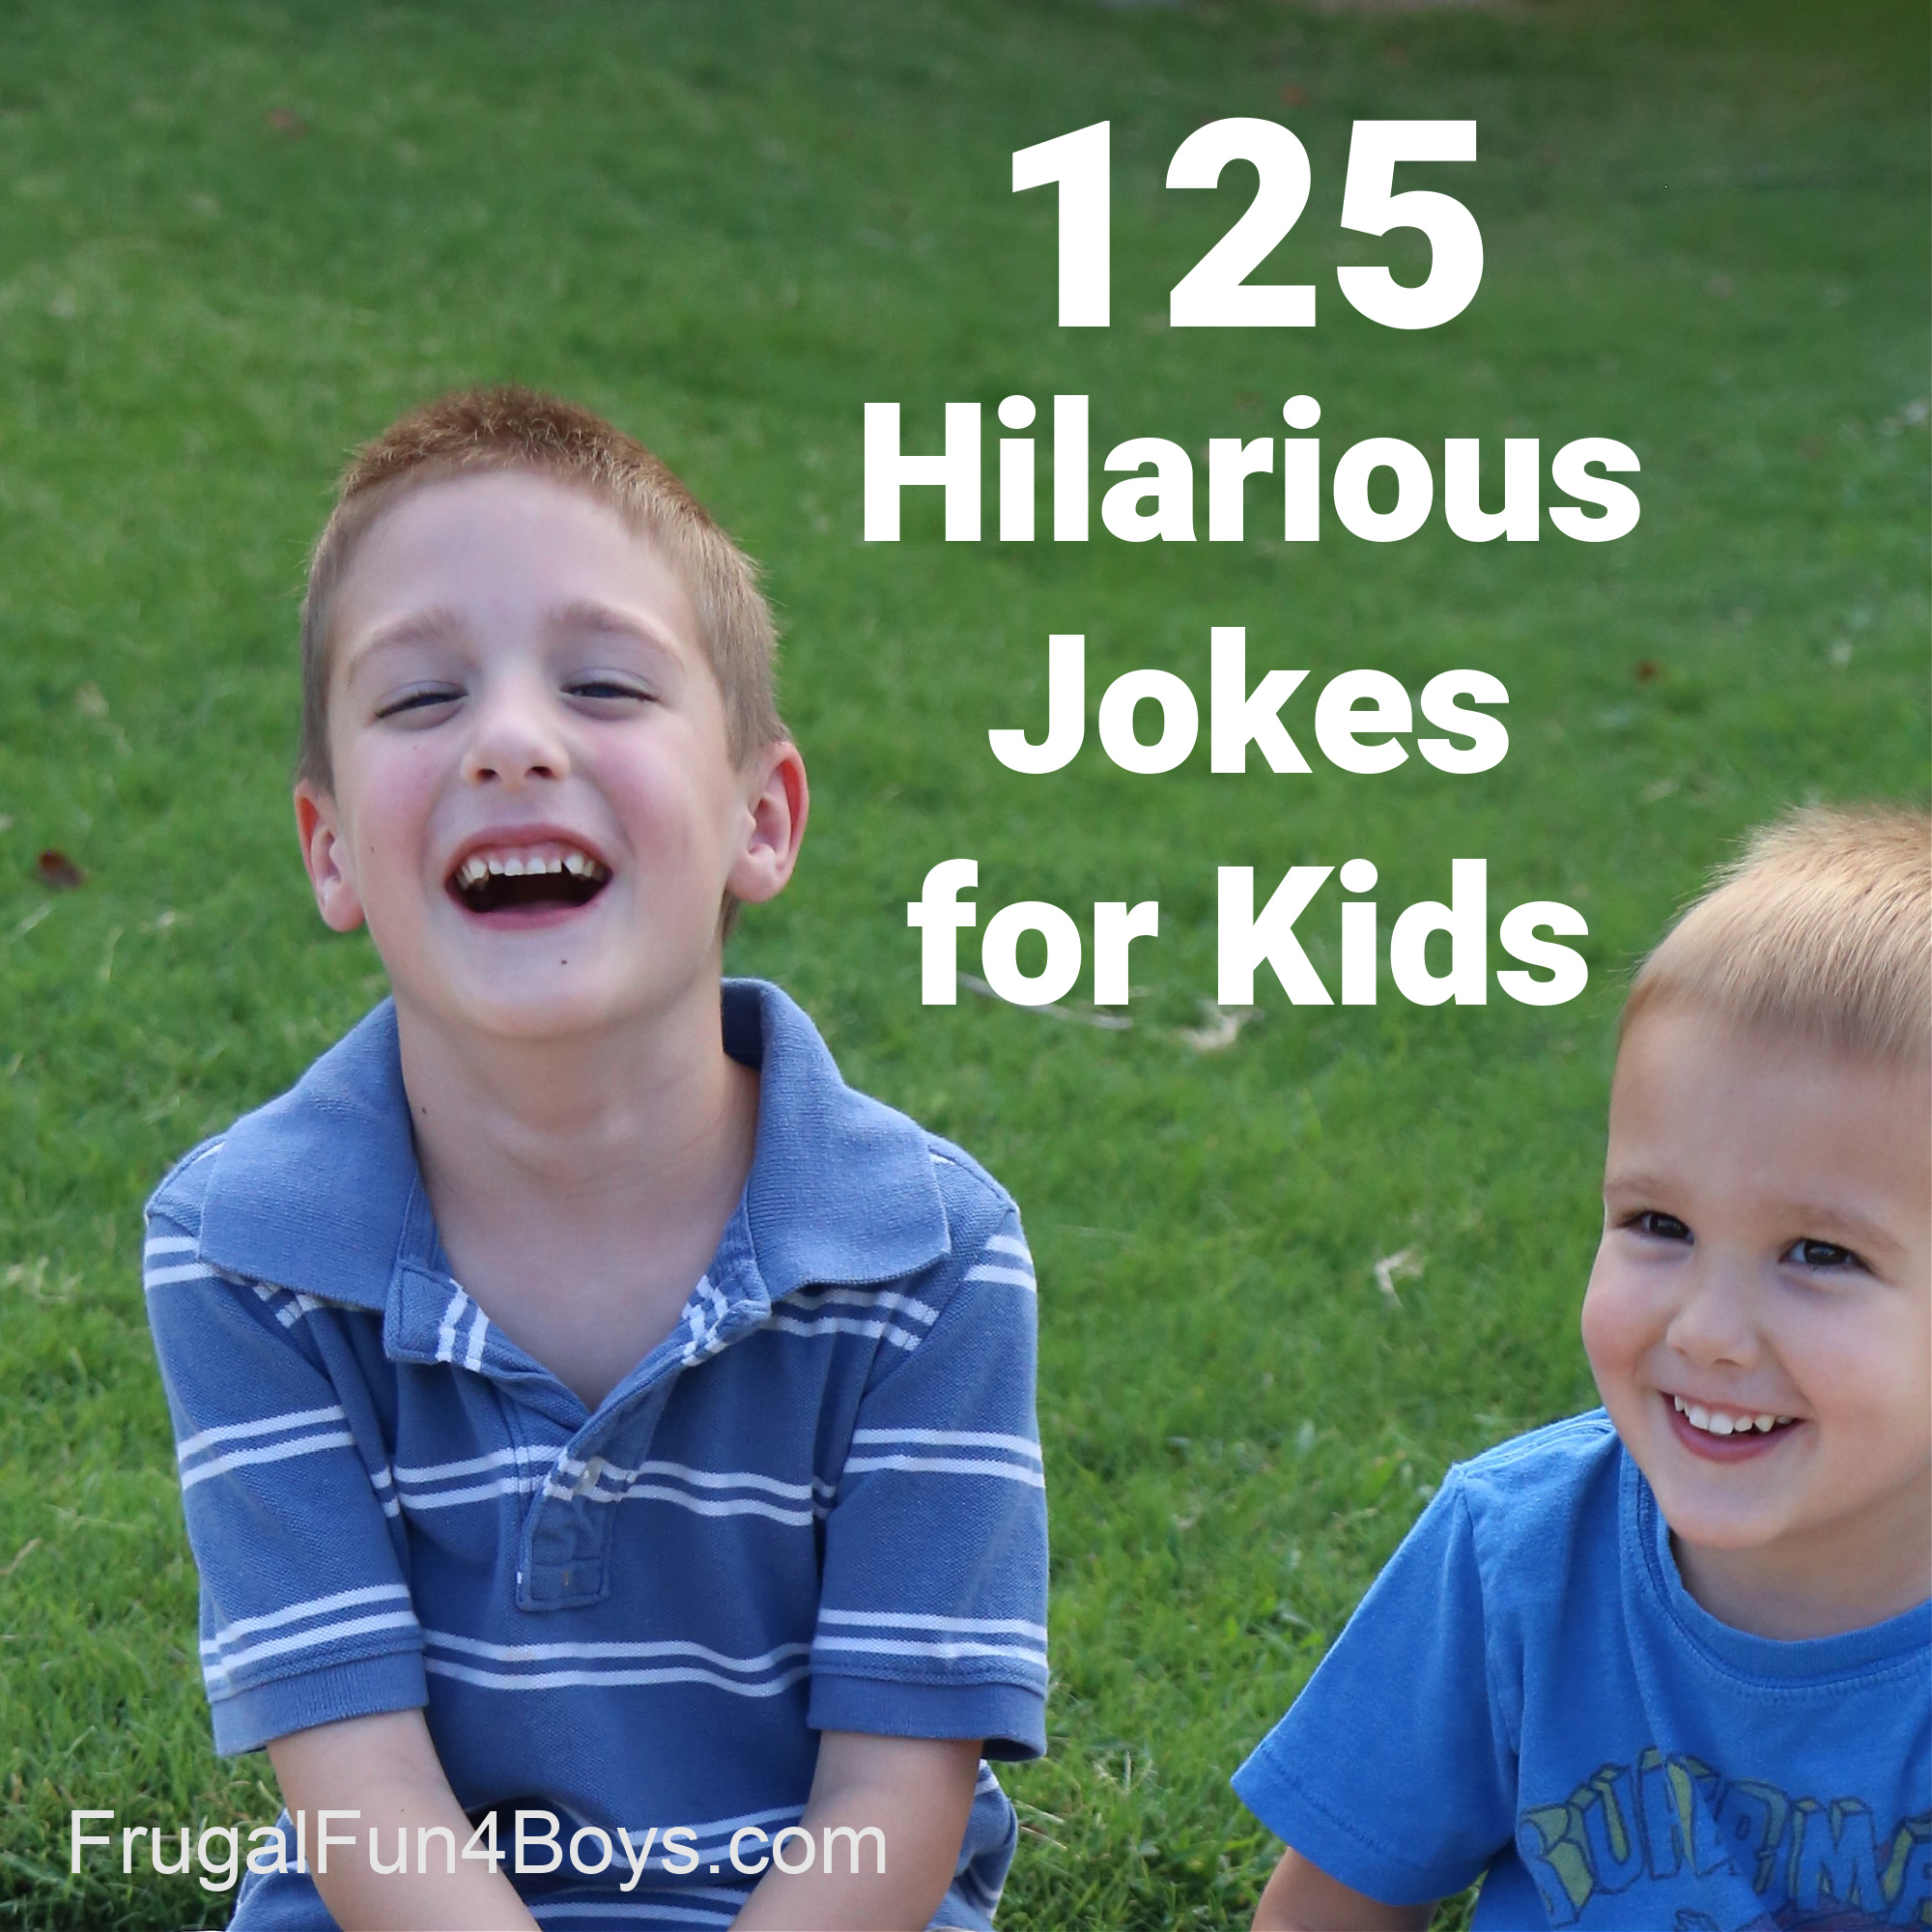 125 Hilarious Jokes for Kids  Frugal Fun For Boys and Girls